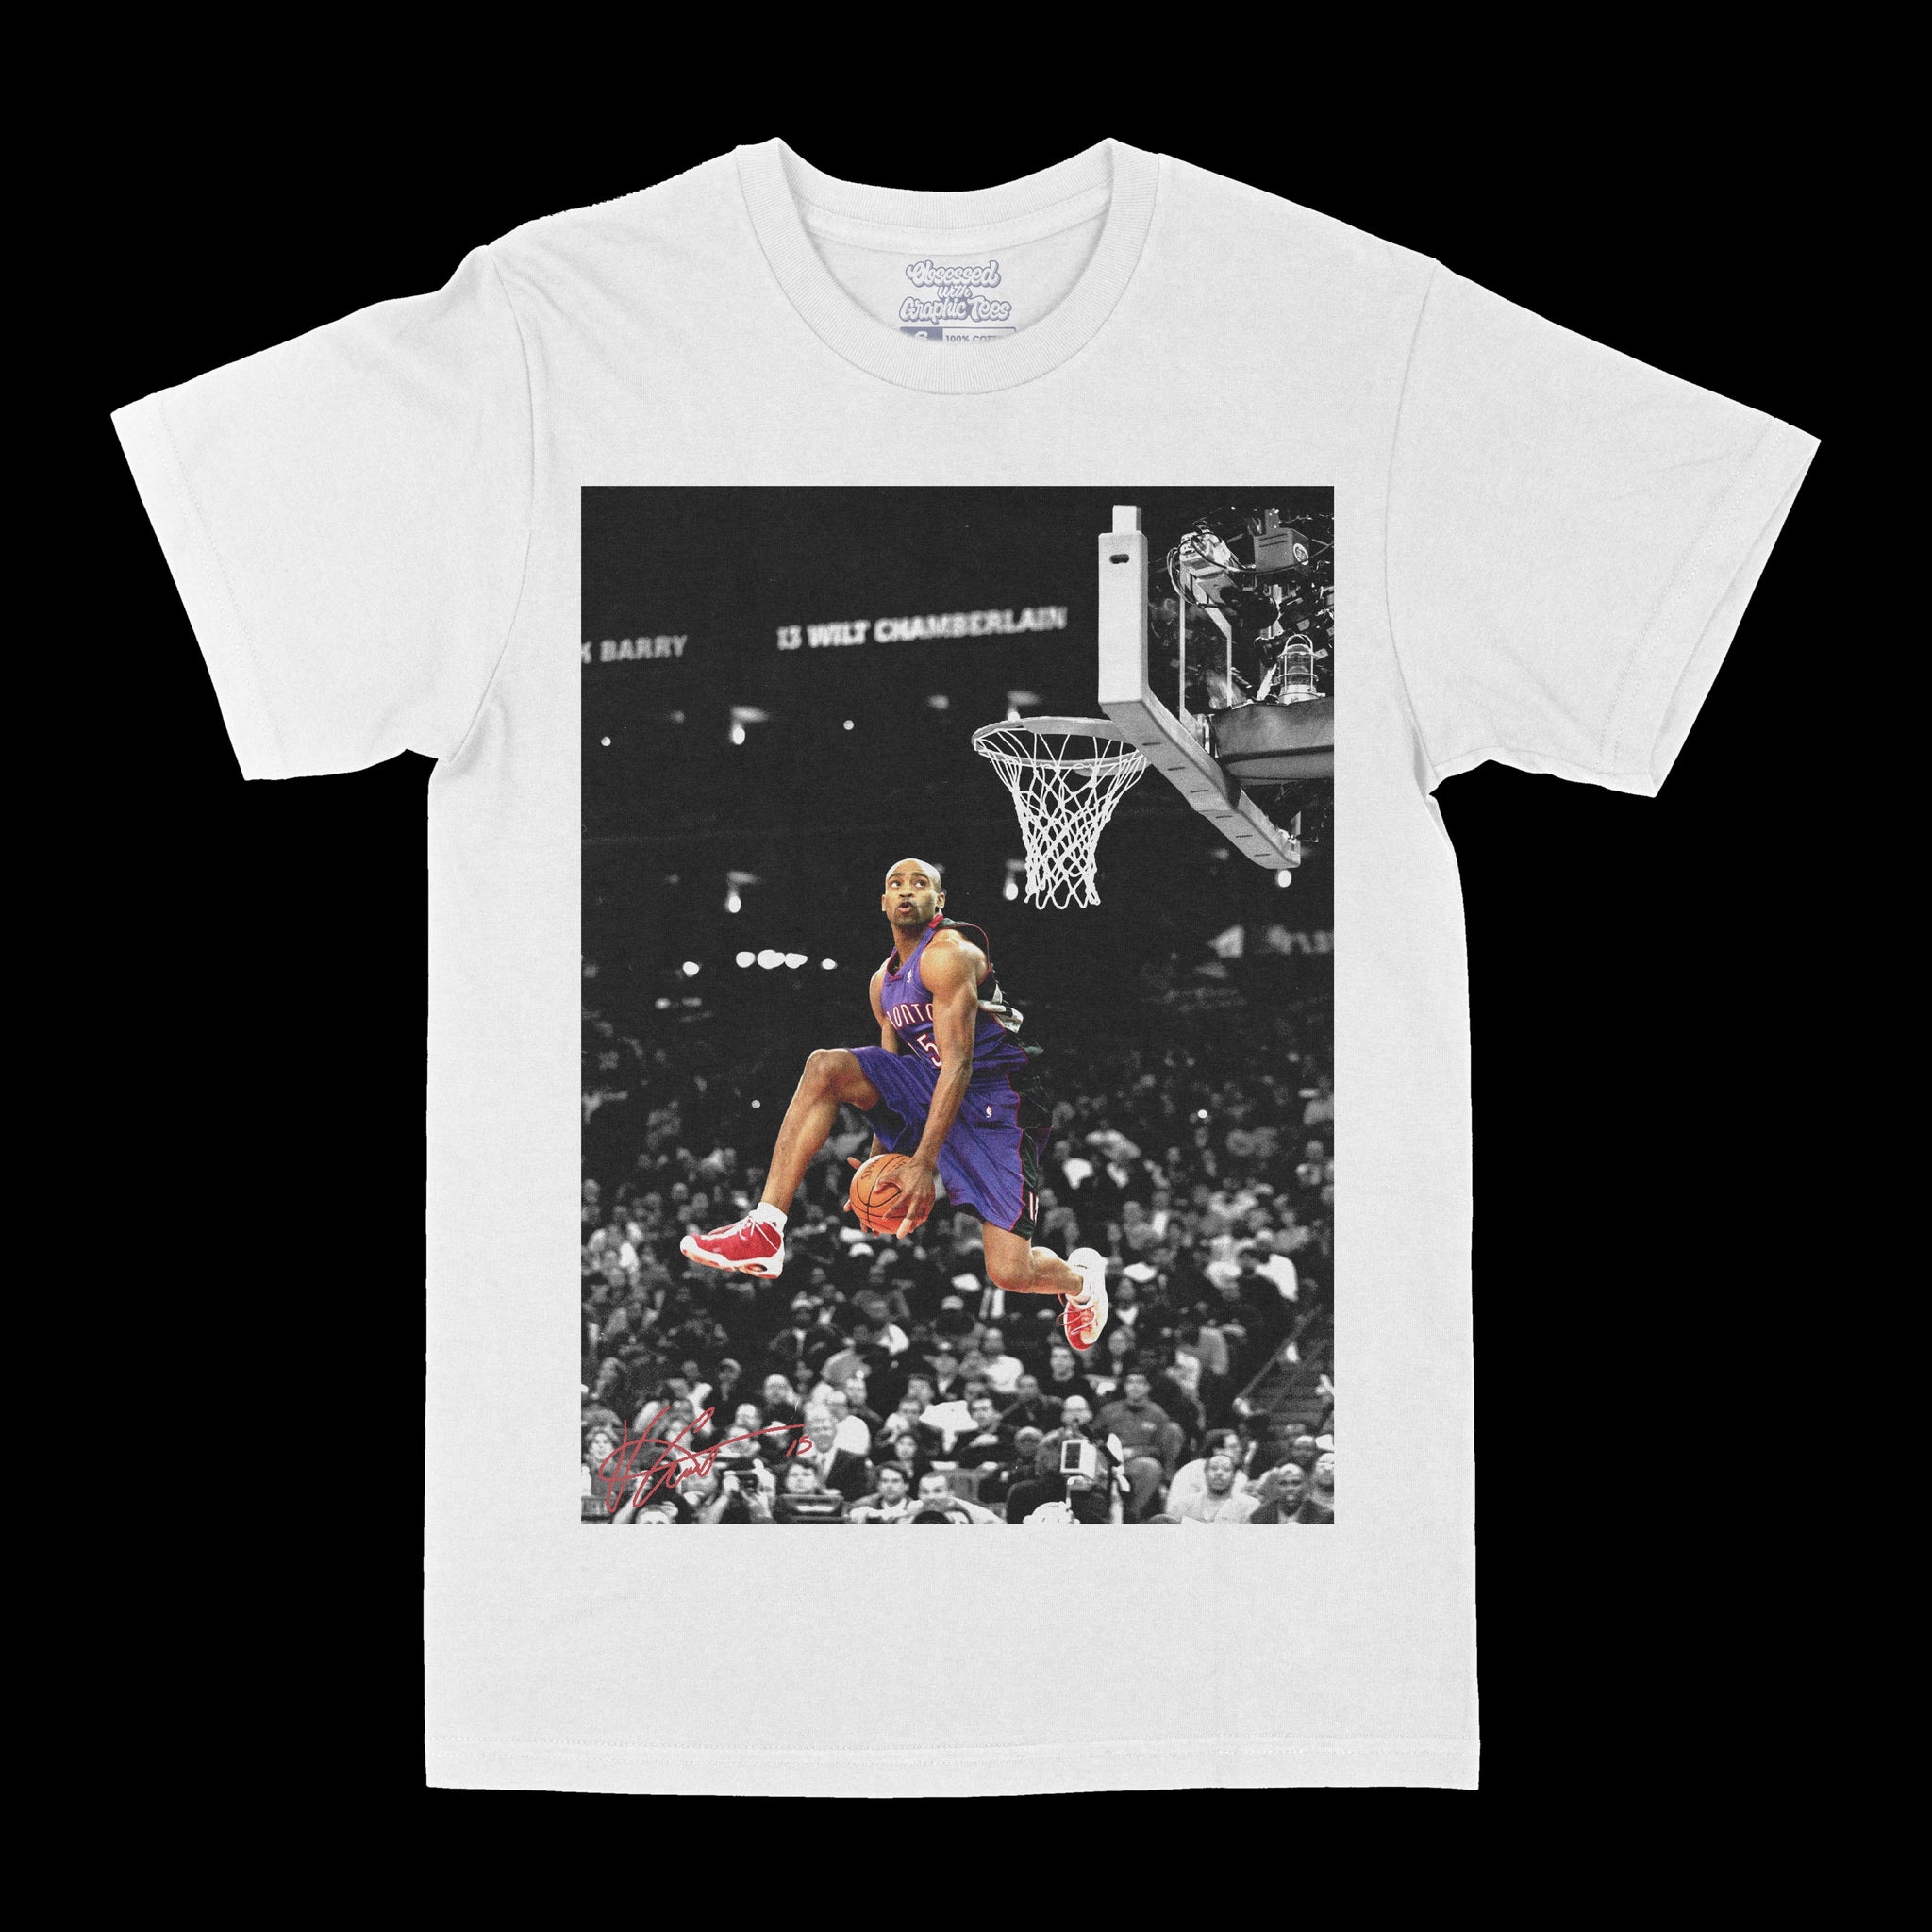 Vince Carter Signature Moment Graphic Tee